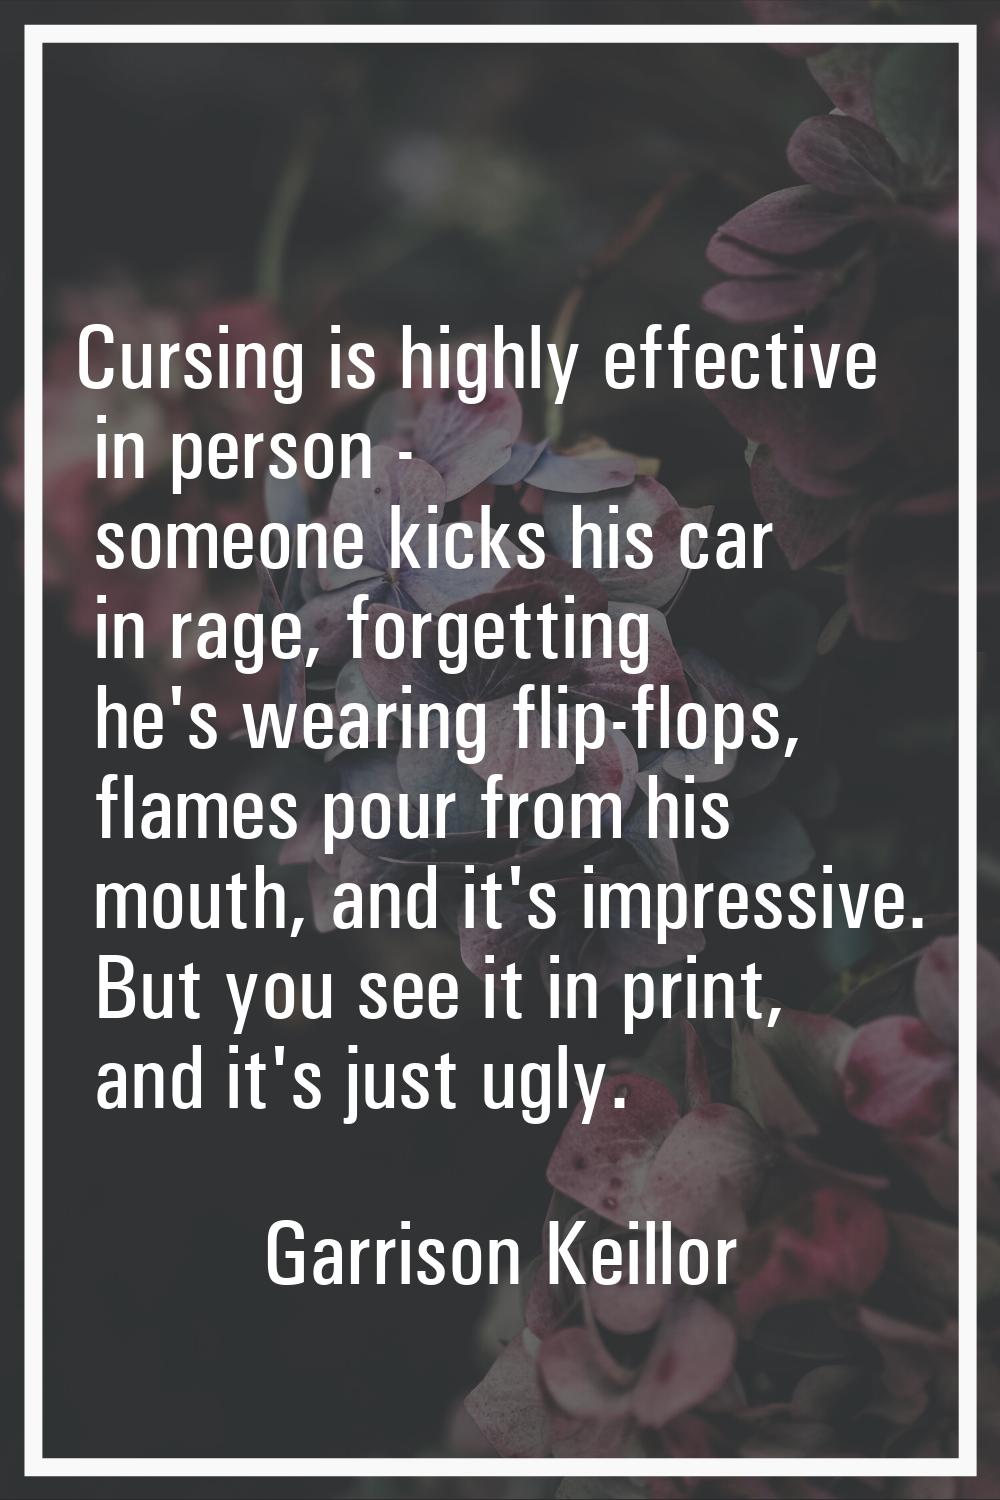 Cursing is highly effective in person - someone kicks his car in rage, forgetting he's wearing flip